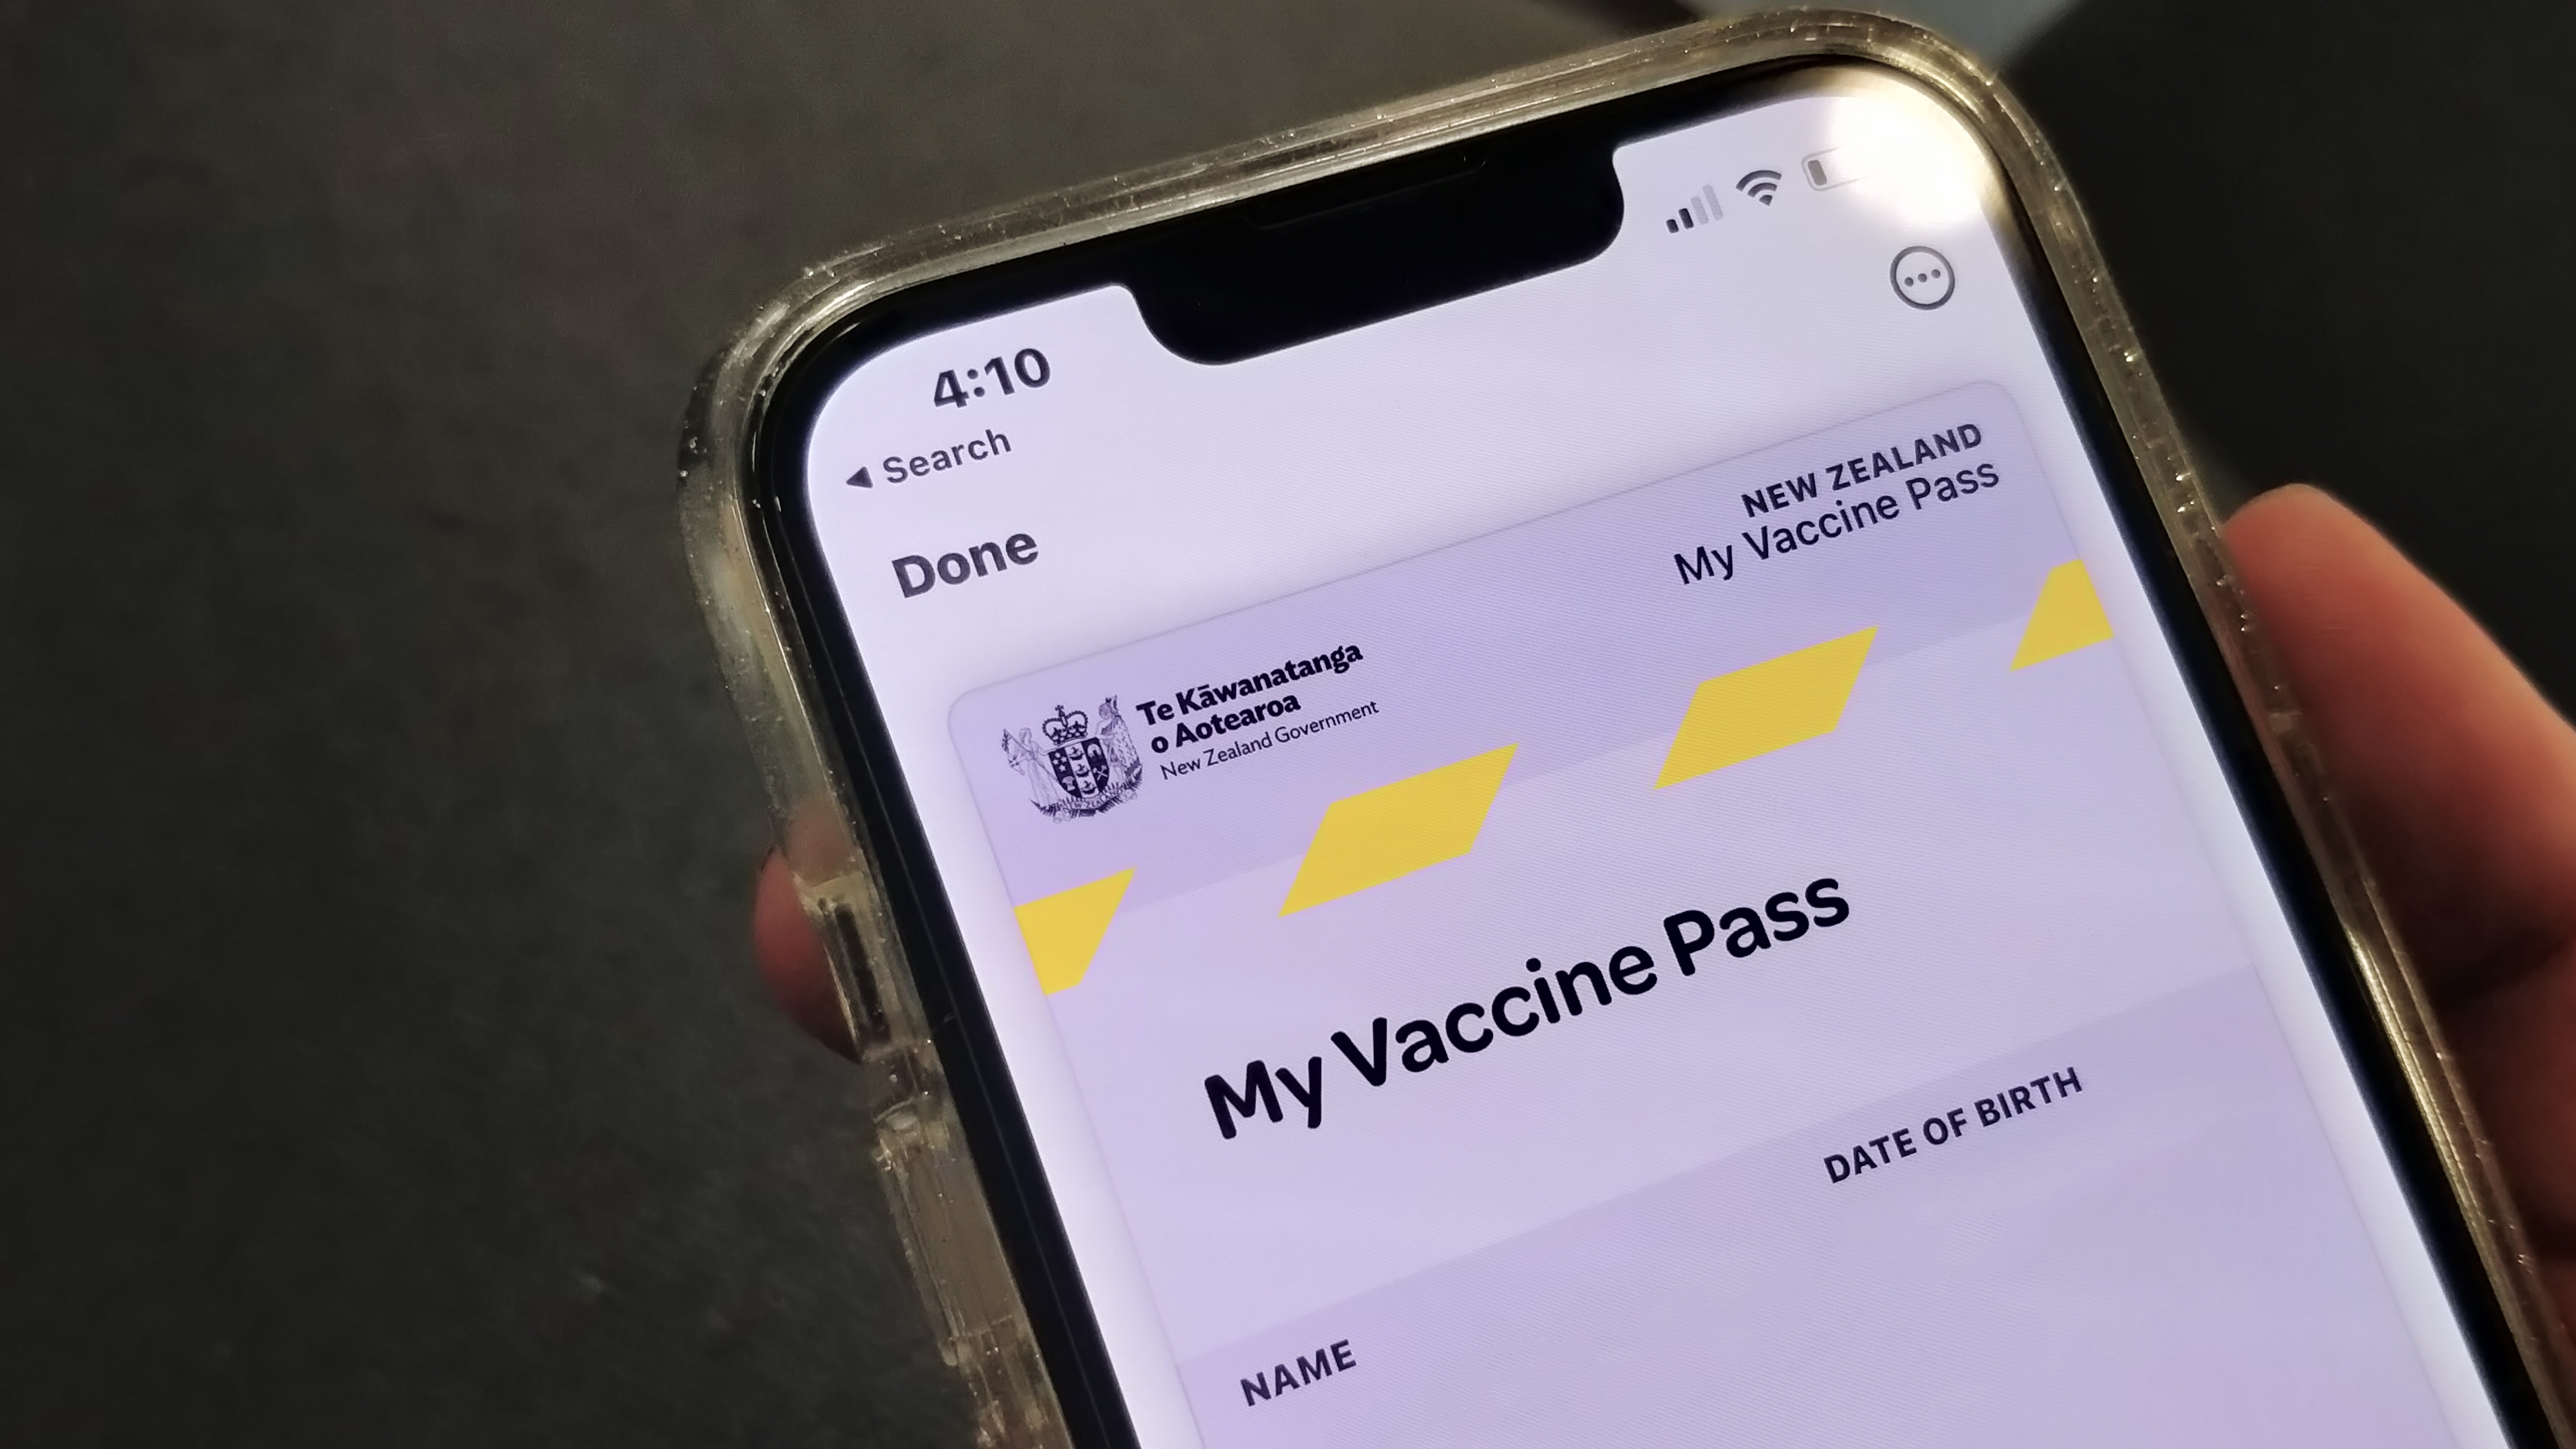 Mixed views on dropping of vaccine pass requirements